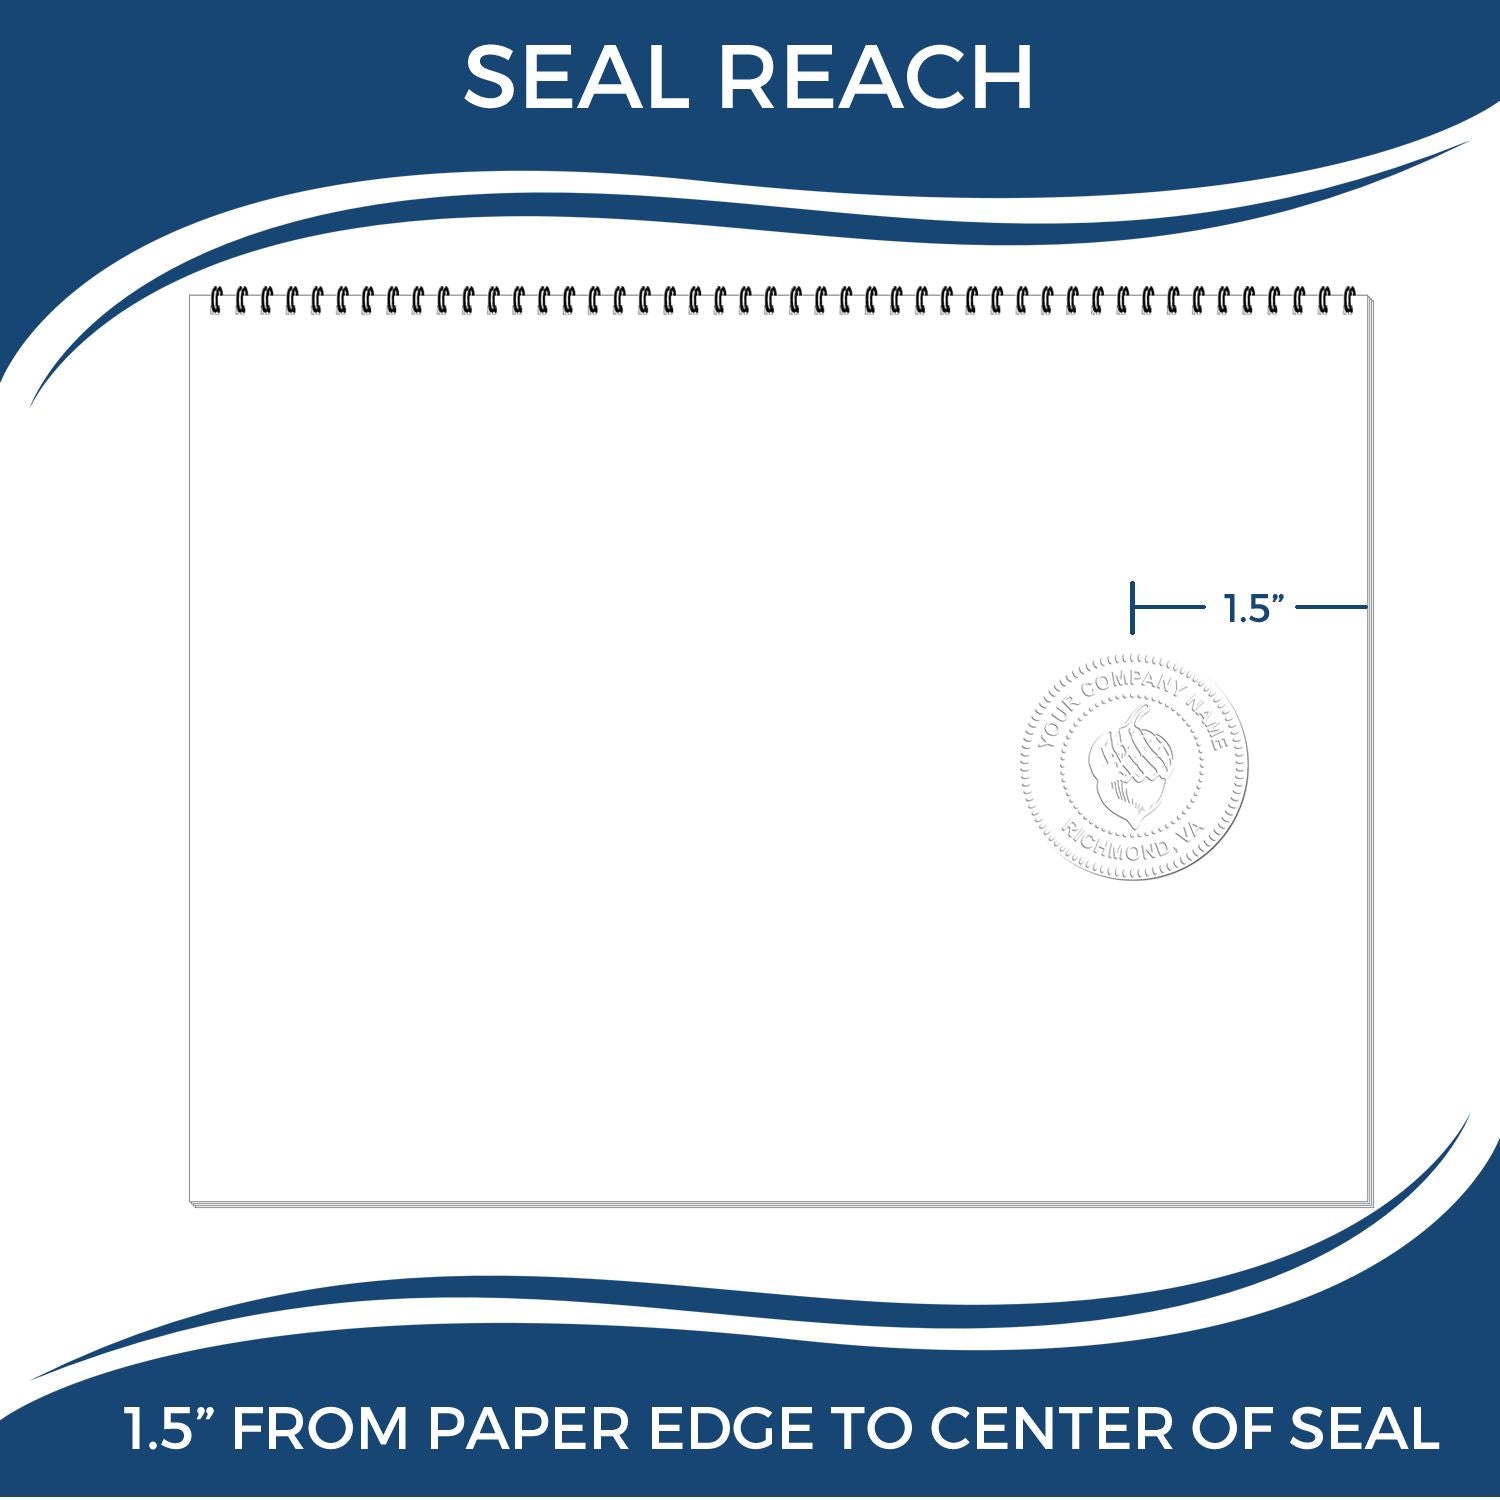 An infographic showing the seal reach which is represented by a ruler and a miniature seal image of the Gift Arkansas Architect Seal